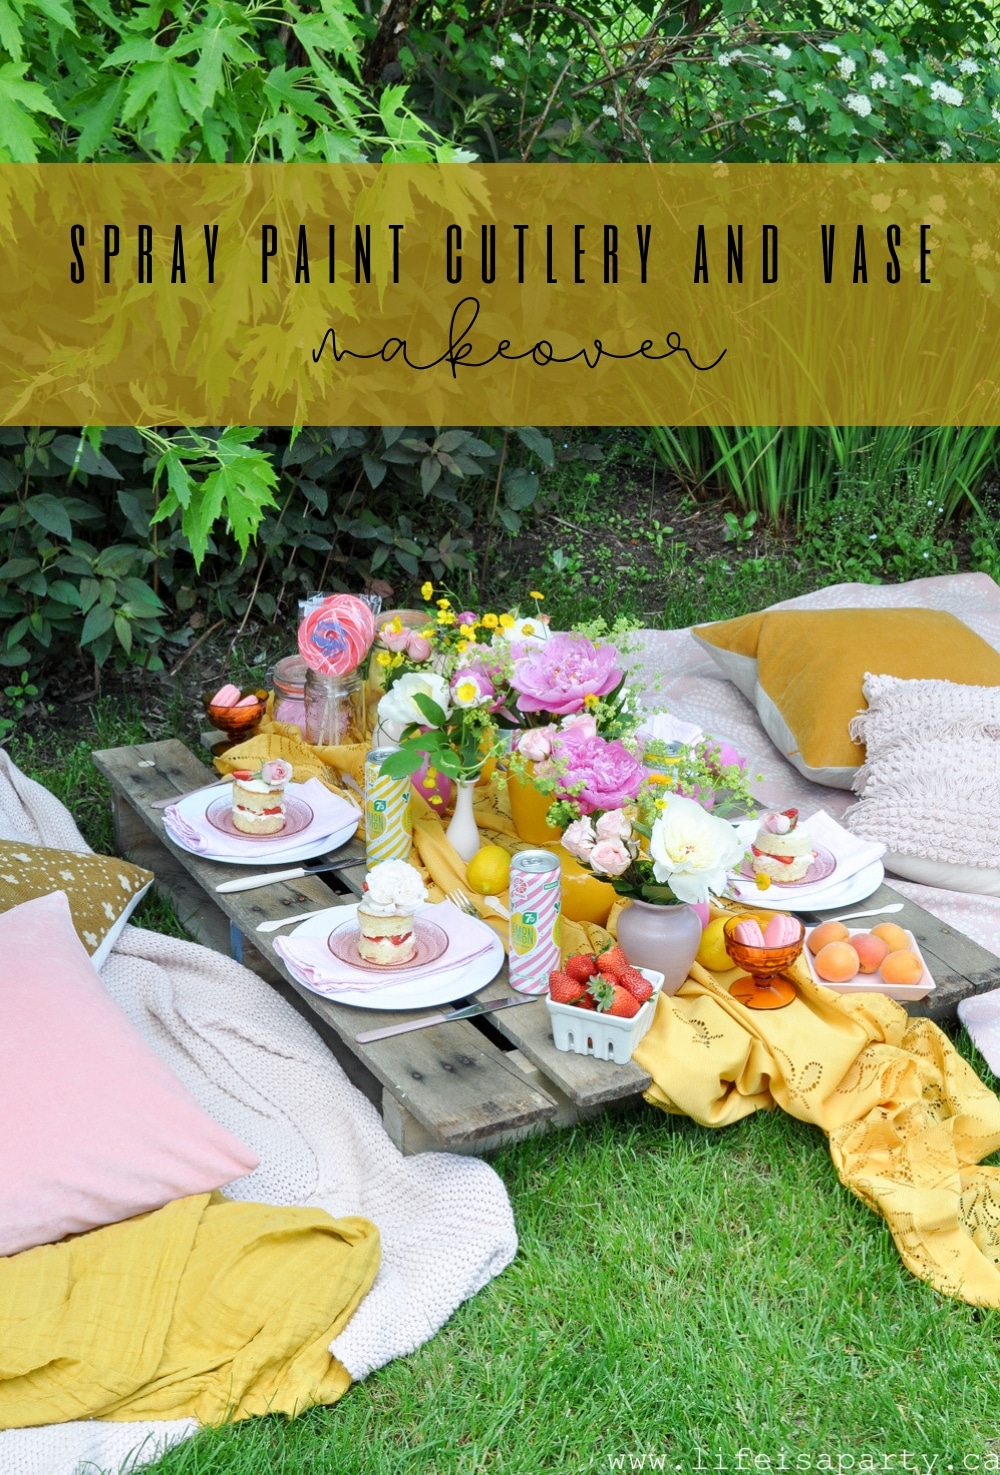 Spray Painted Vase Cutlery and Makeover: give inexpensive thrift store vases and cutlery new life with spray paint, perfect for entertaining.